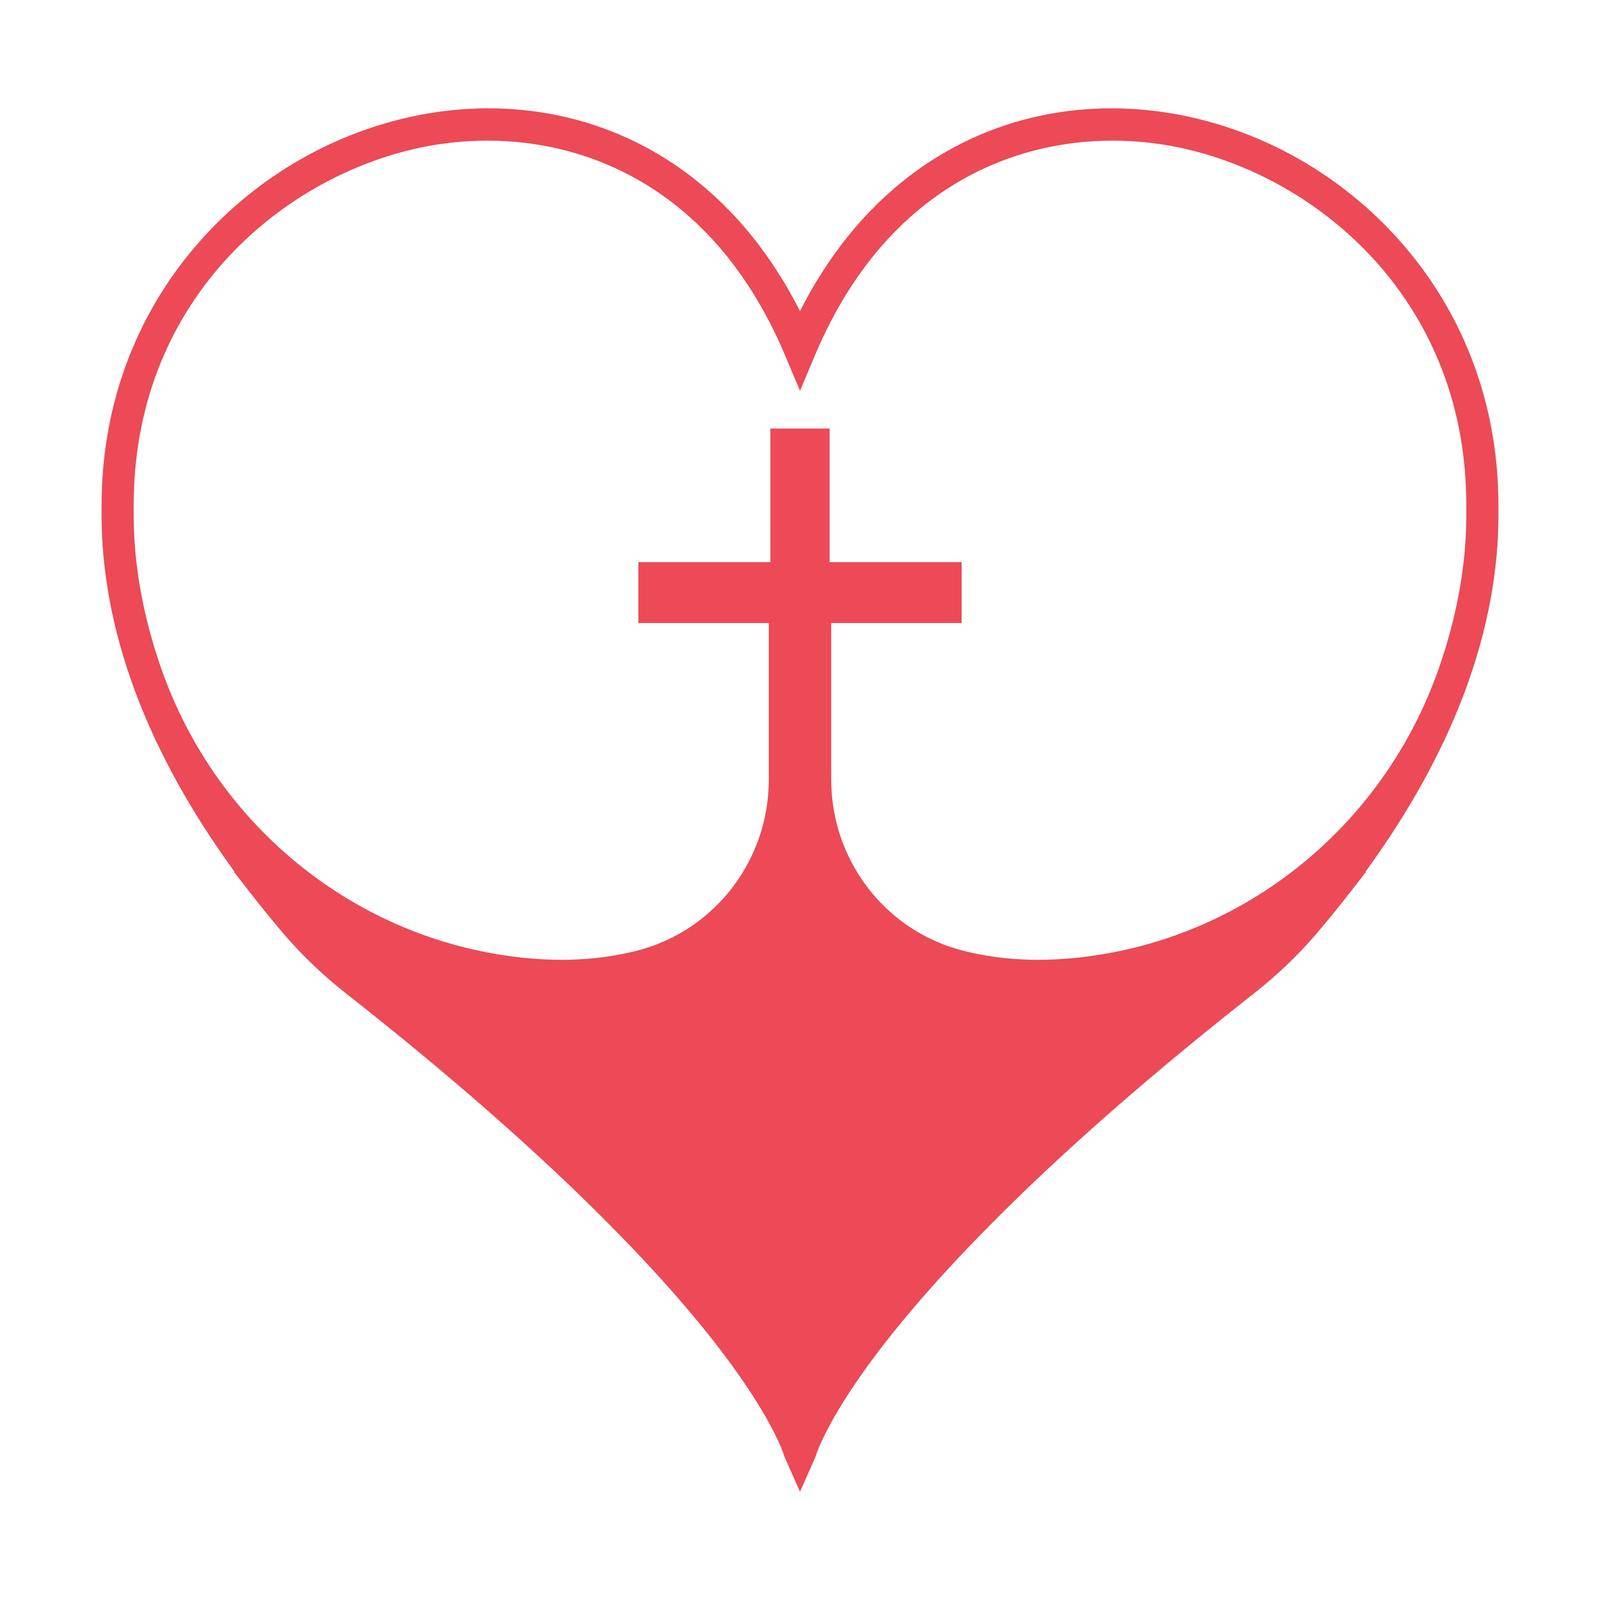 Christian cross in the heart symbol of faith in God, vector red heart with crucifix cross sign of the Christian Community